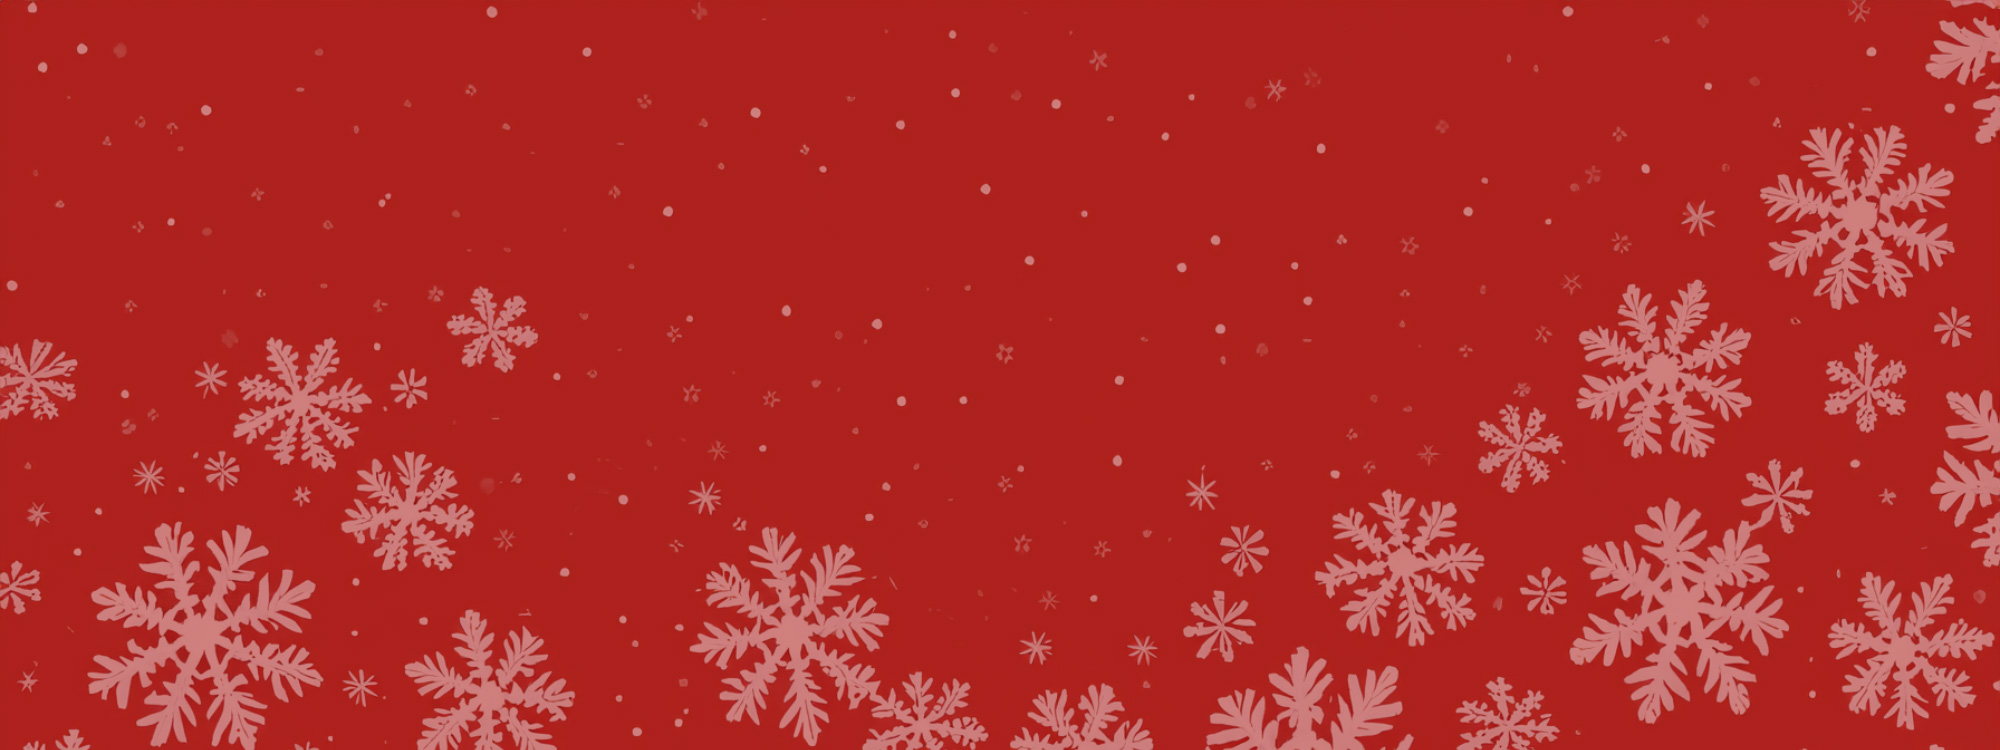 Red-snowflakes-2000x750